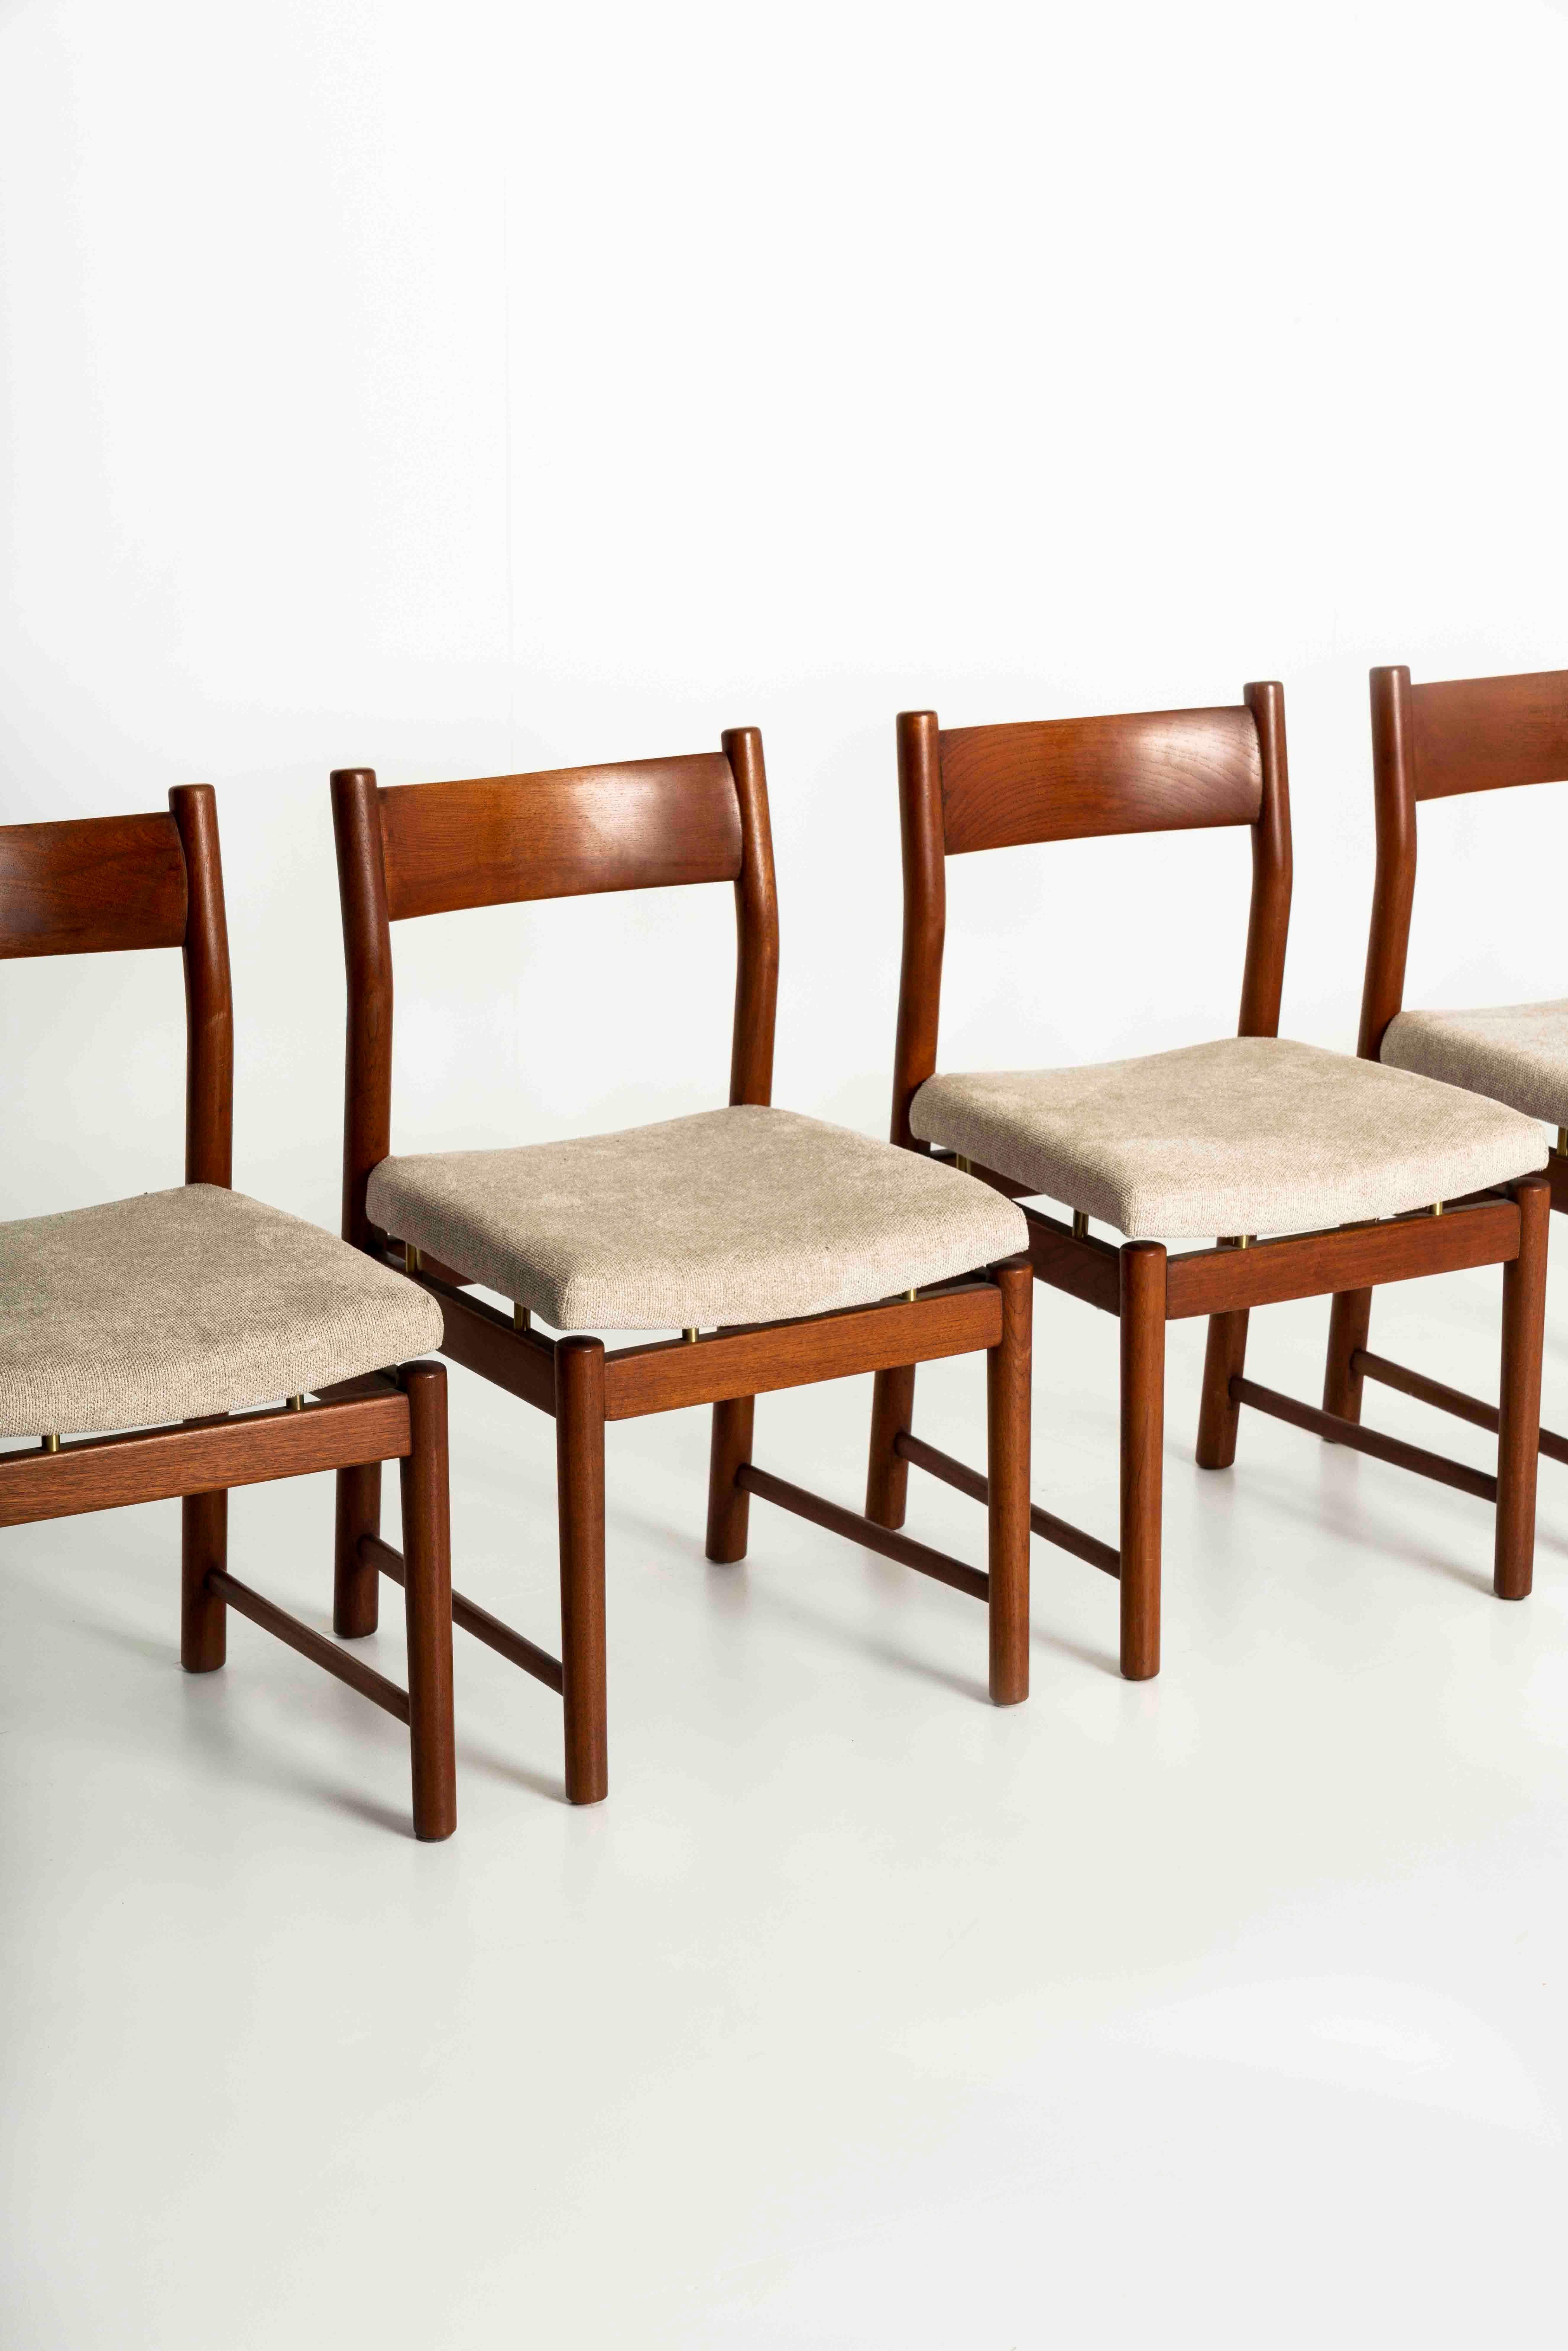 Set of six dining room chairs by Ilmari Tapiovaara for La Permanente Cantù Italy, the 1950s. The chairs have a solid wood teak structure with brass details under the seating area. The seating area is newly upholstered in an attractive off-white